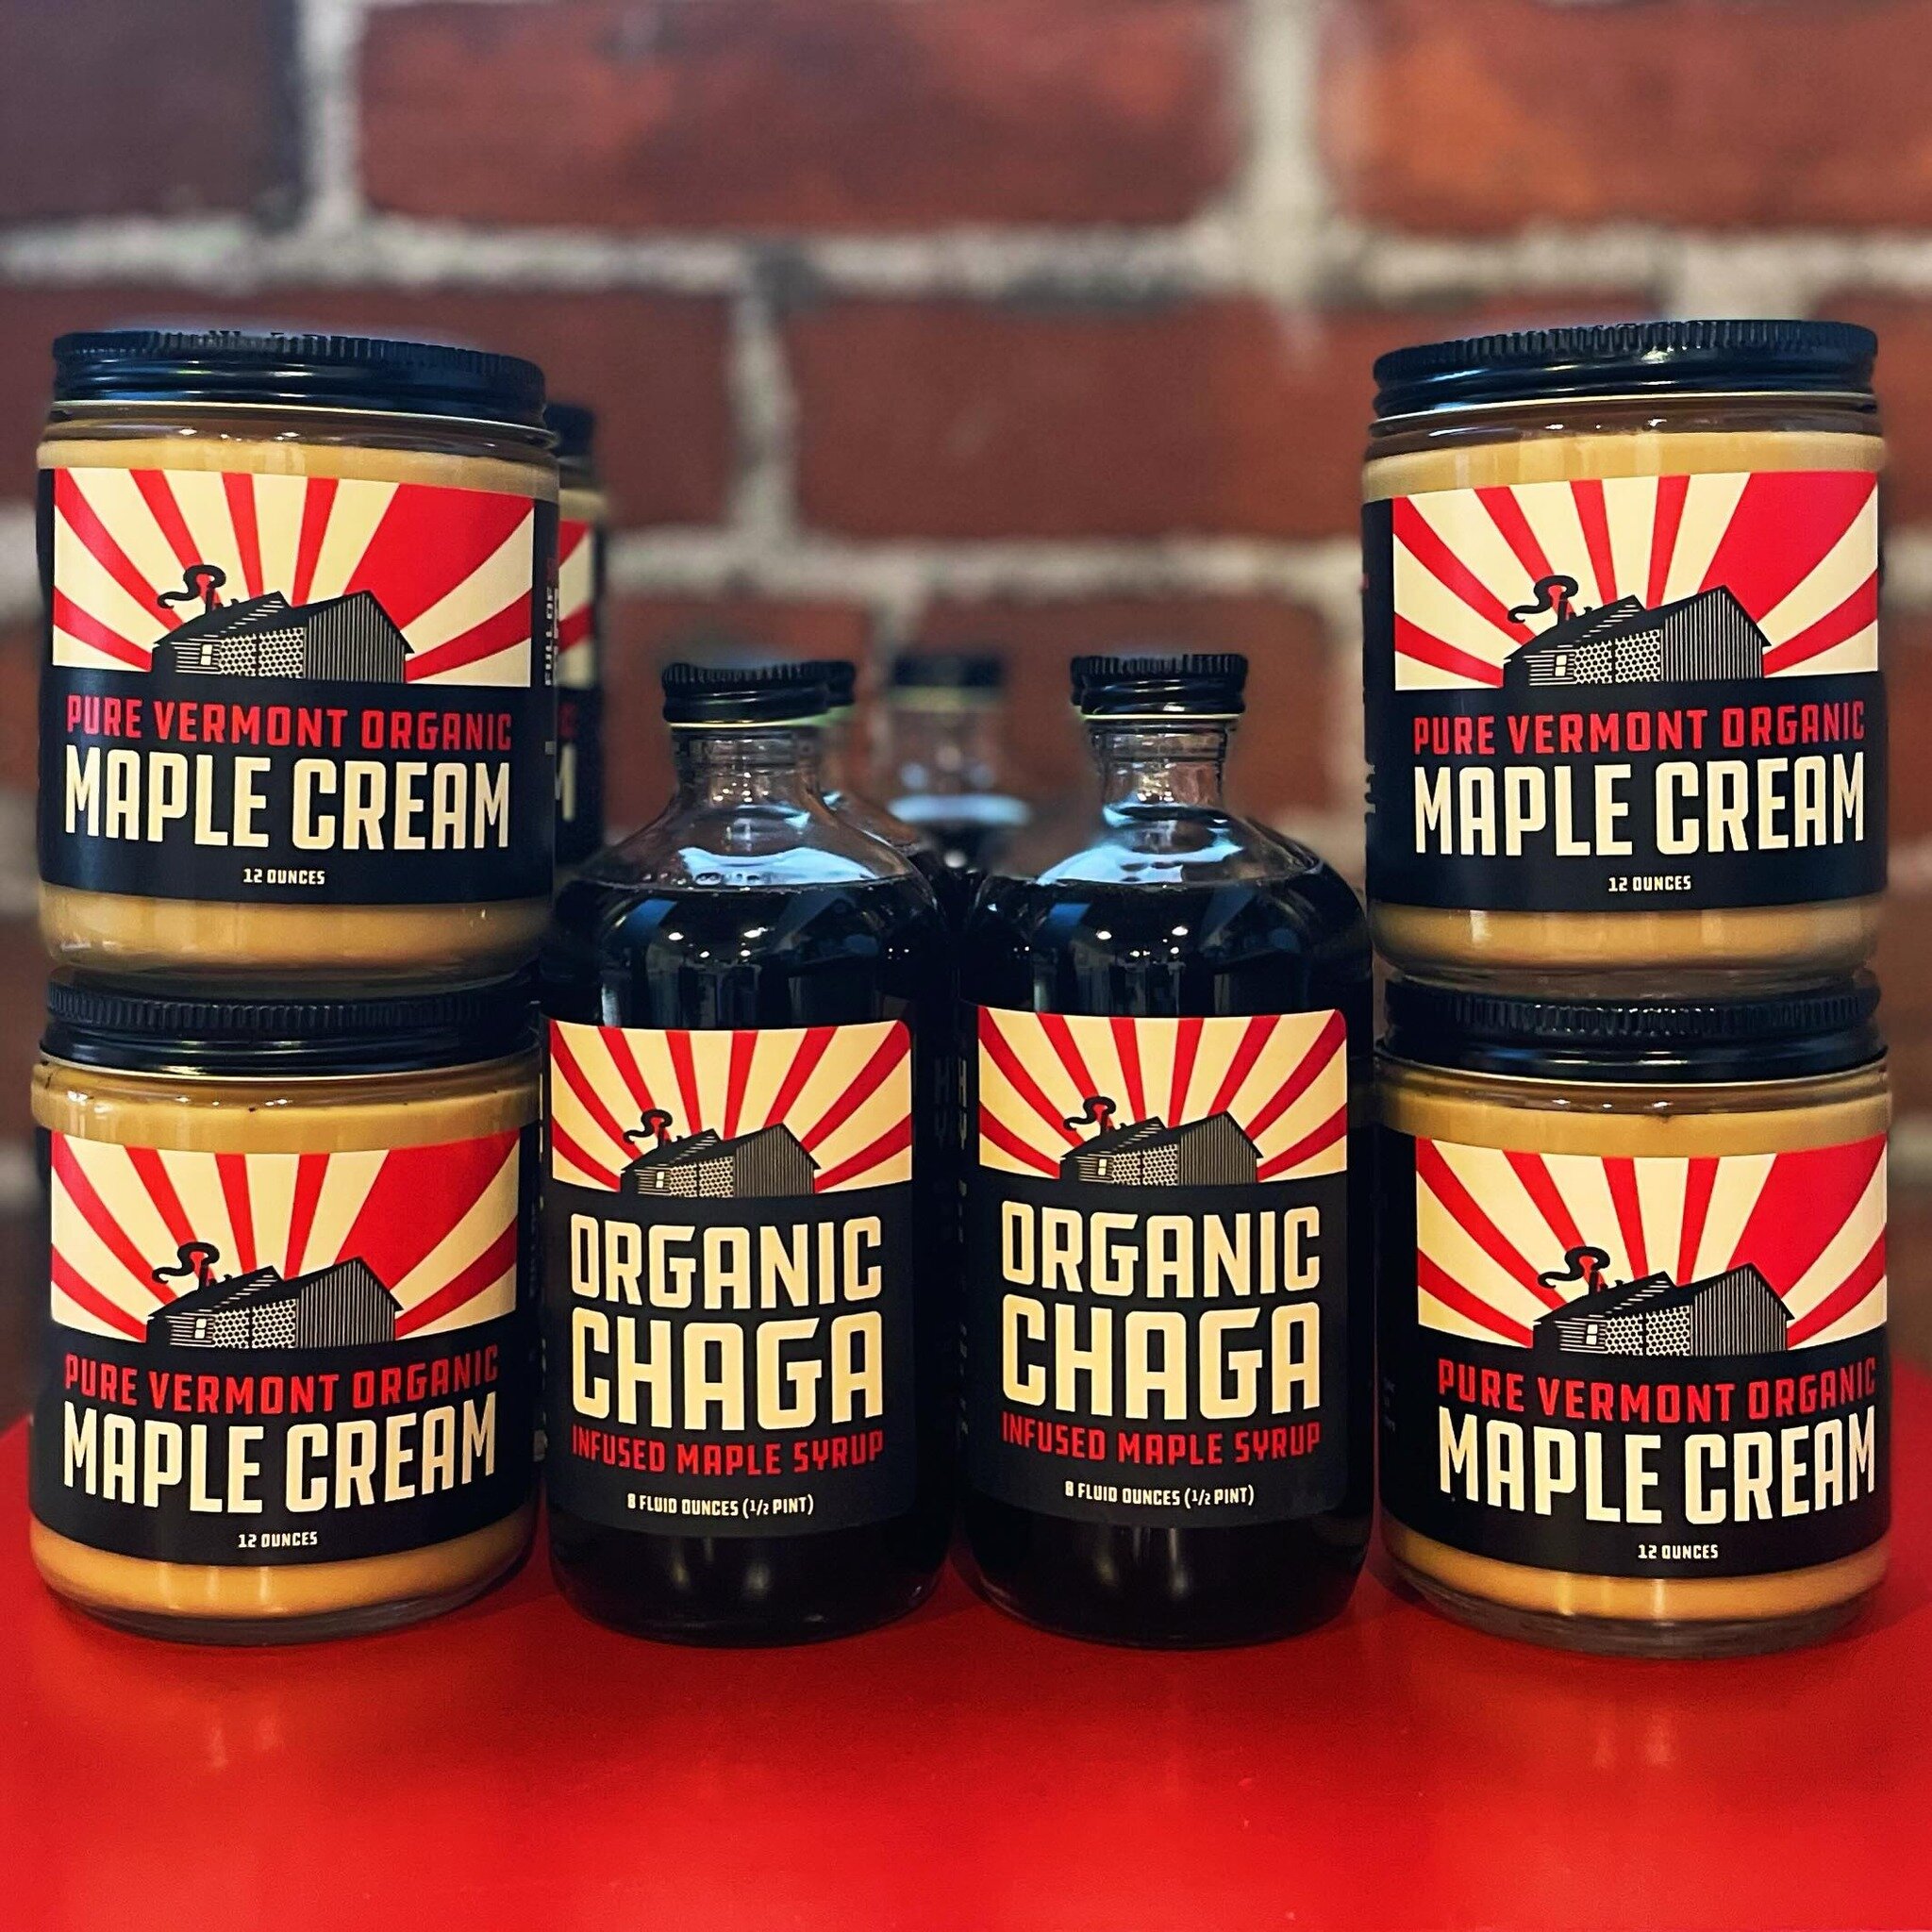 Absolutely brimming with ✨EARTH ENERGY✨

Fresh design love for @squaredealfarm 

#love #maple #tappersdelight #design #labeldesign #vermont #vermontspecialtyfood #organic